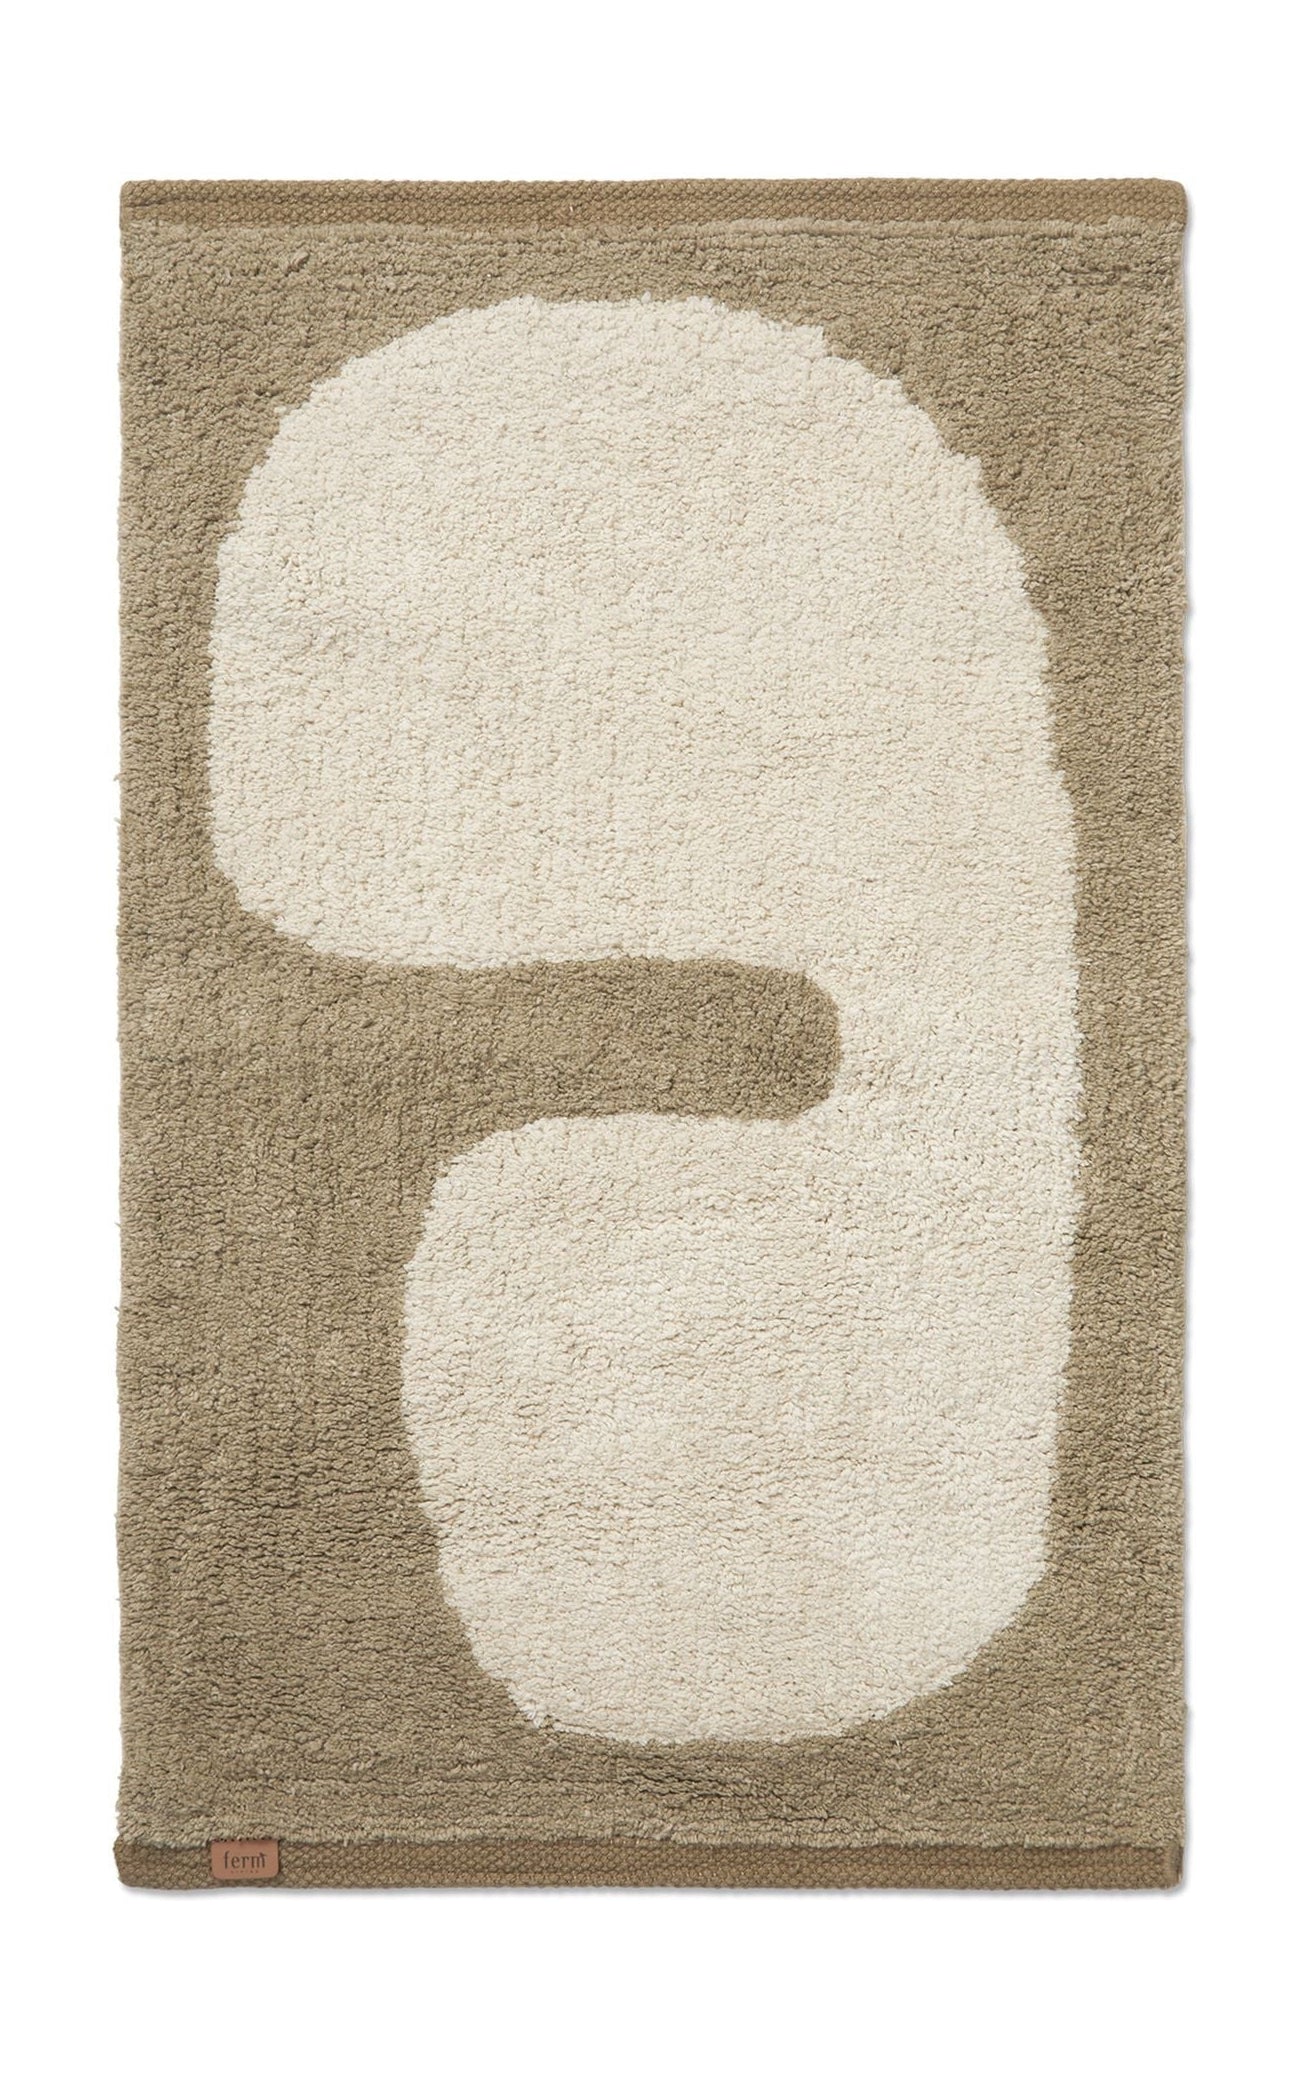 Ferm Living Leg wasbare mat, donkere taupe/uit wit wit